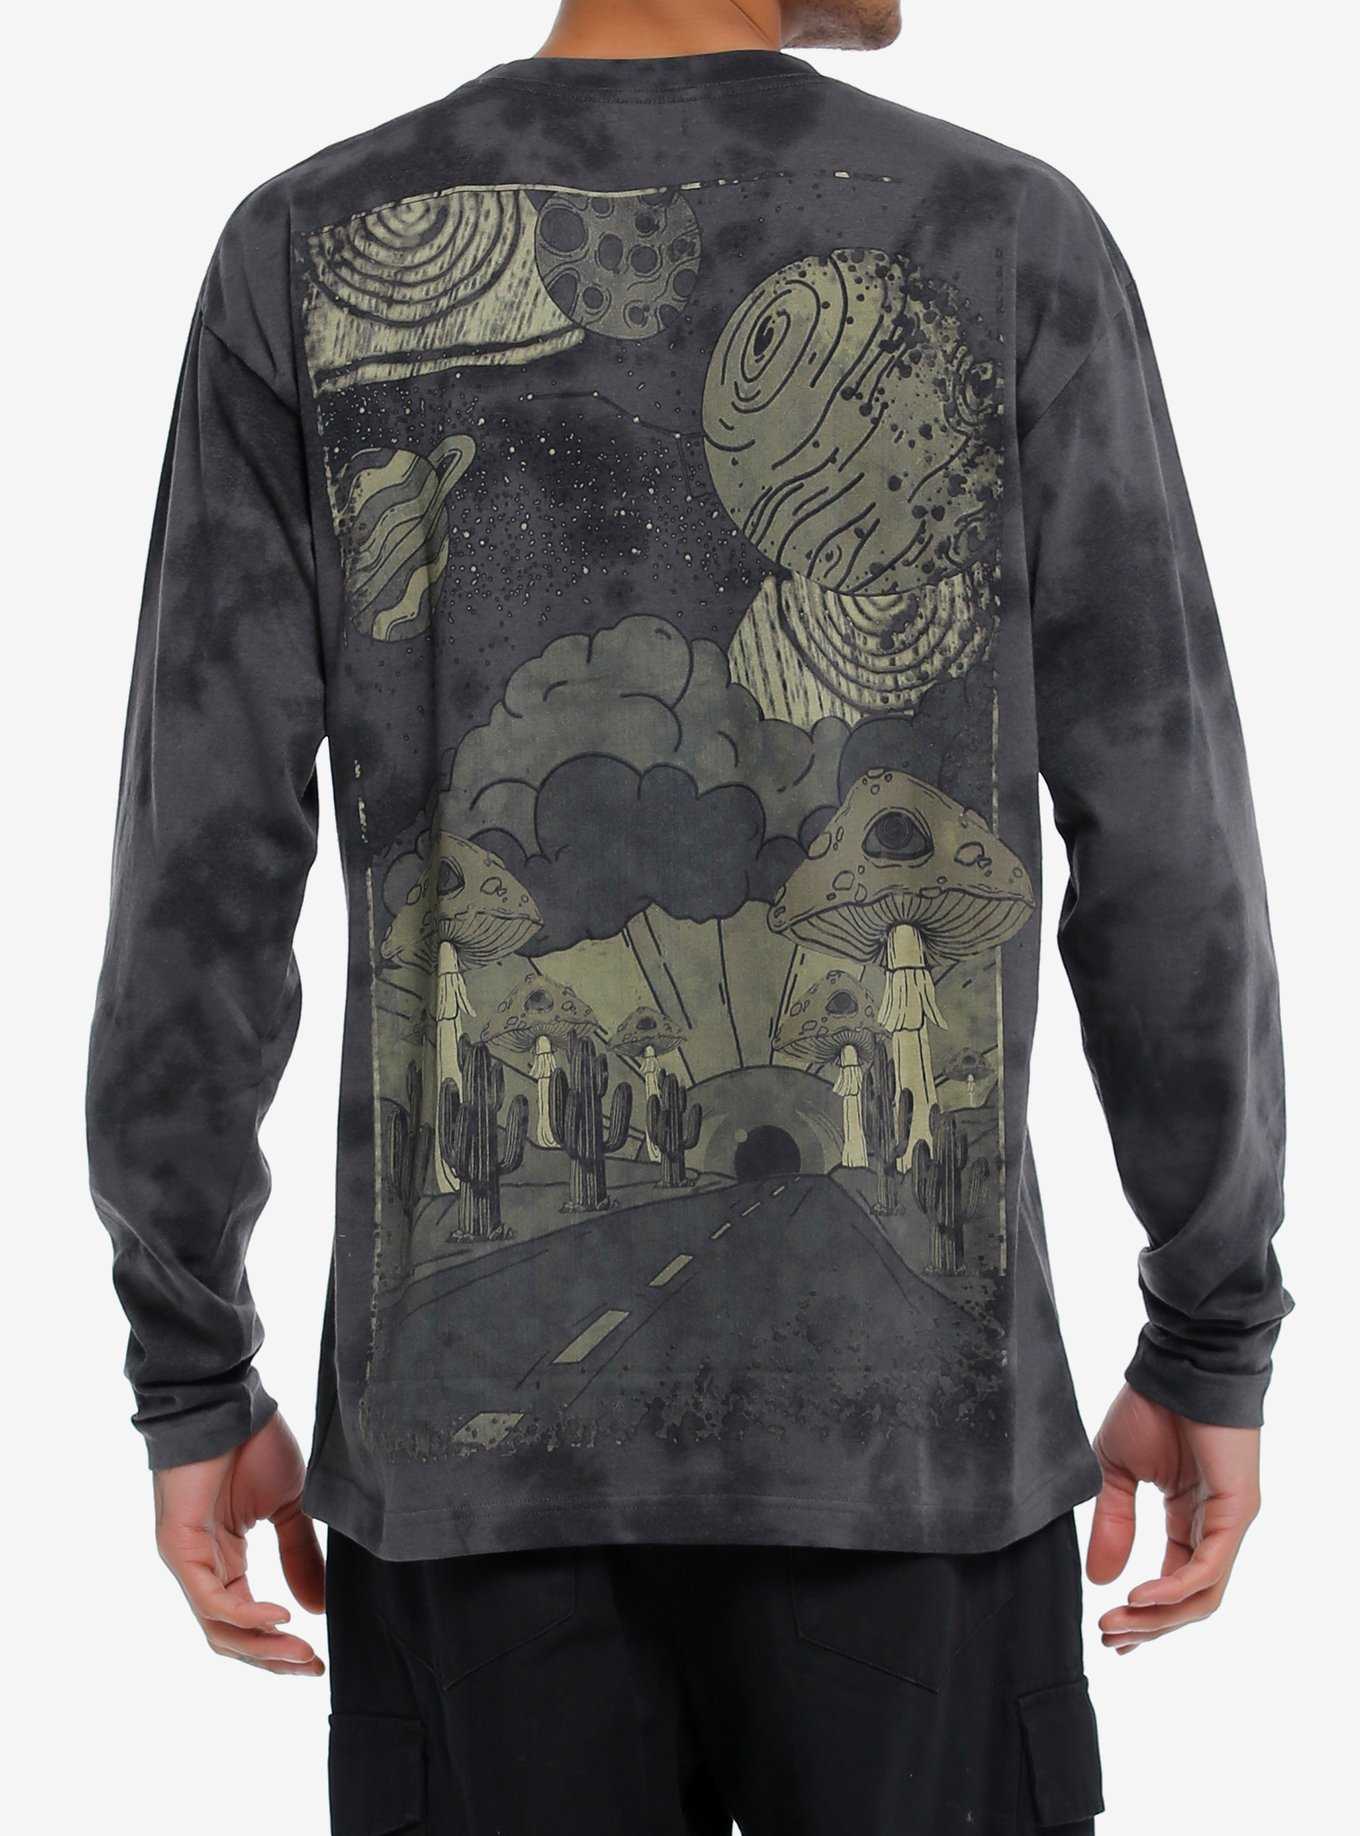 Outer Space Mushroom Creature Tie-Dye Long-Sleeve T-Shirt, , hi-res